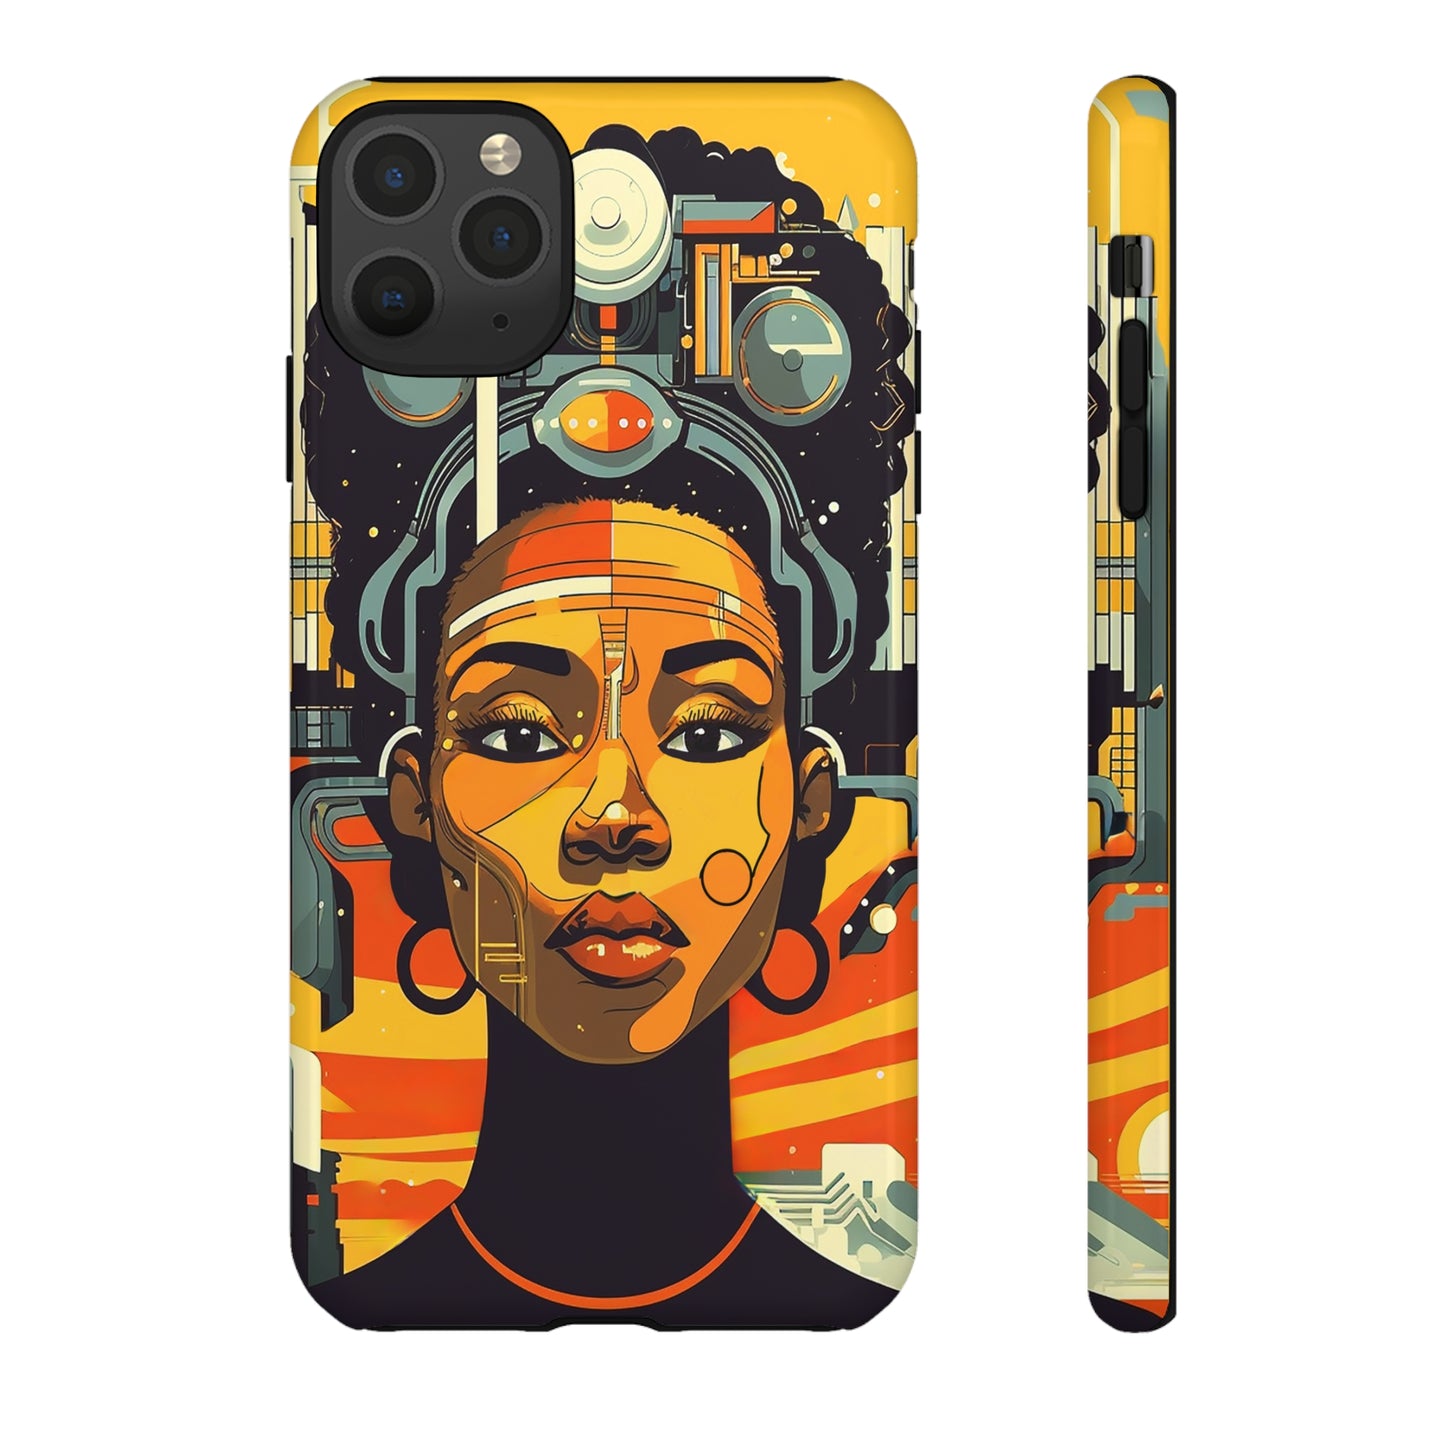 Afro Technology Phone Case